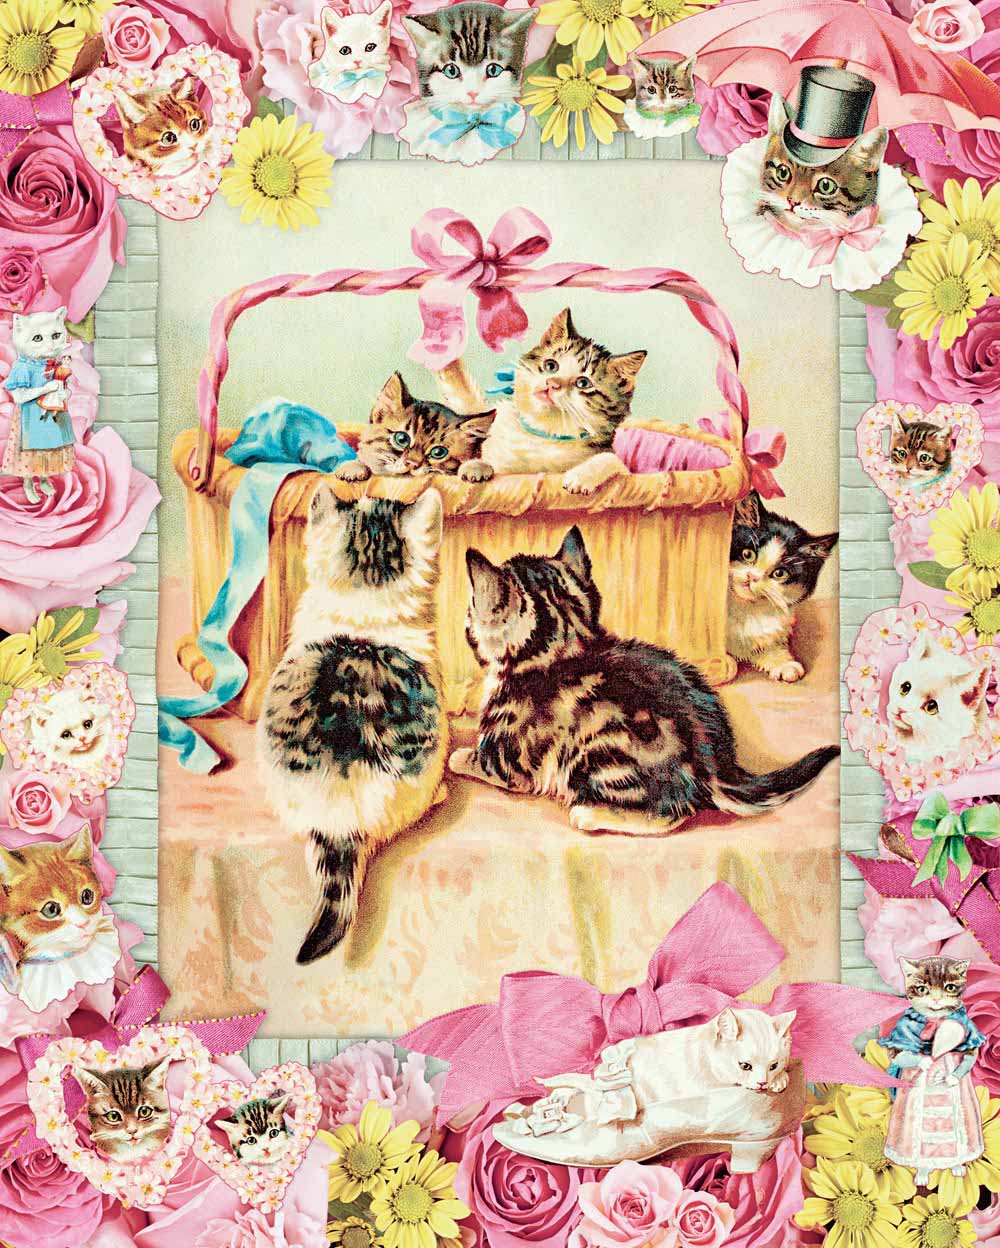 Cynthia Hart's Victoriana Cats: Basket of Mischief  Cats Jigsaw Puzzle